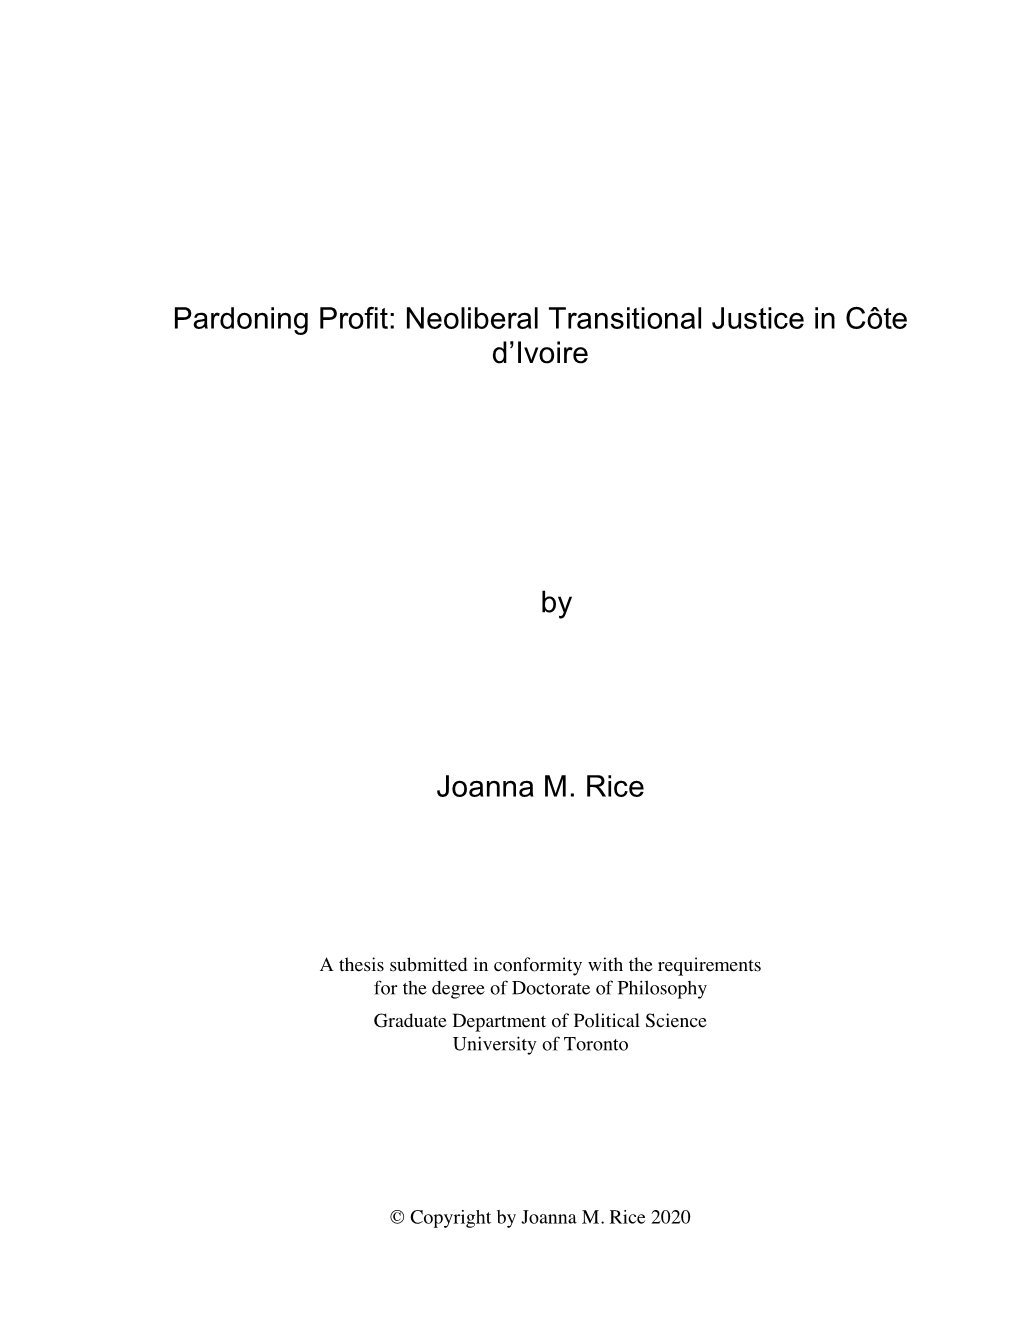 Neoliberal Transitional Justice in Côte D'ivoire by Joanna M. Rice